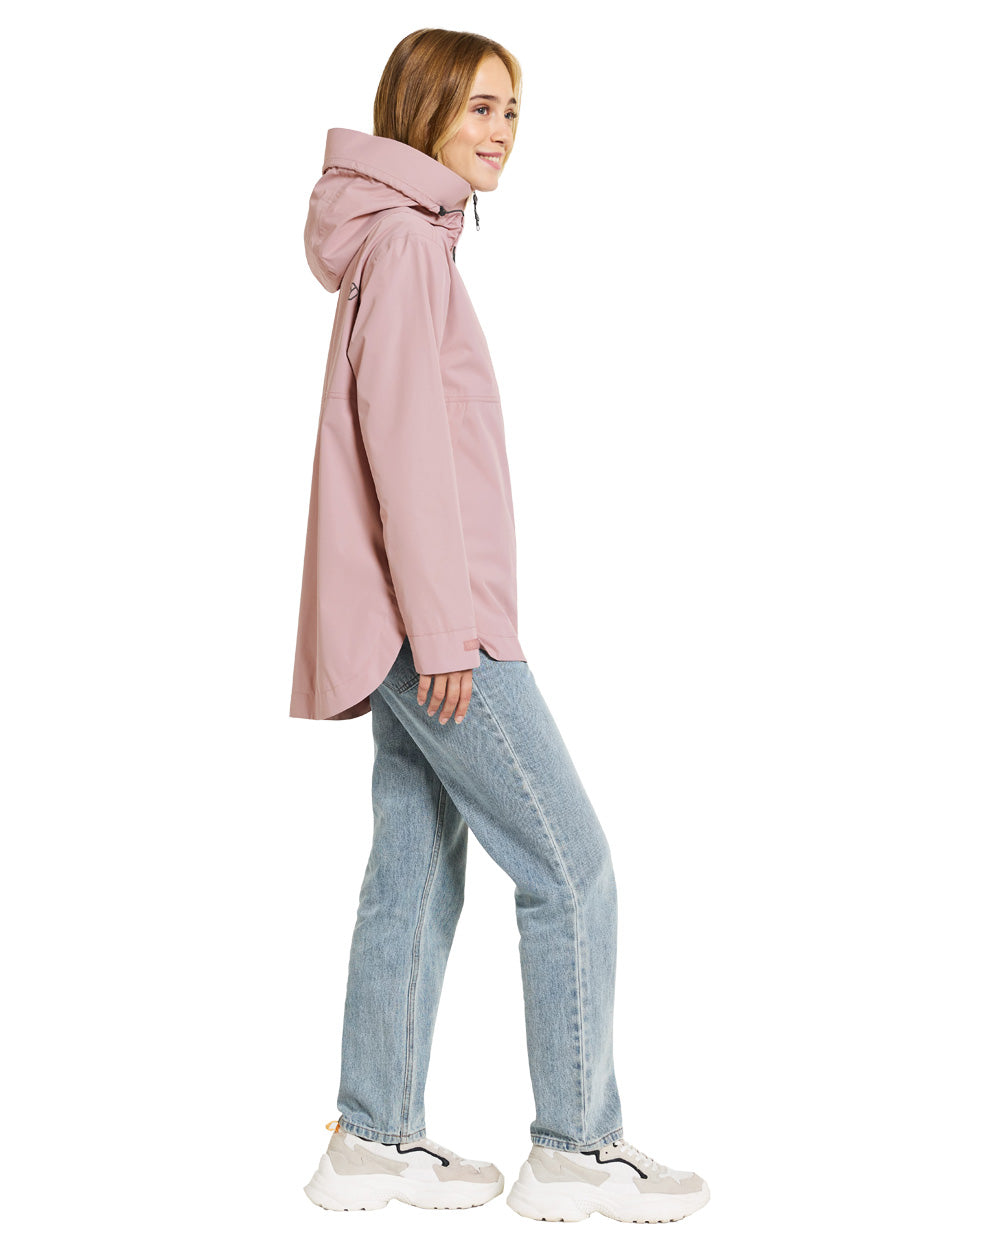 Oyster Lilac coloured Didriksons Tilde Womens Jacket on White background 